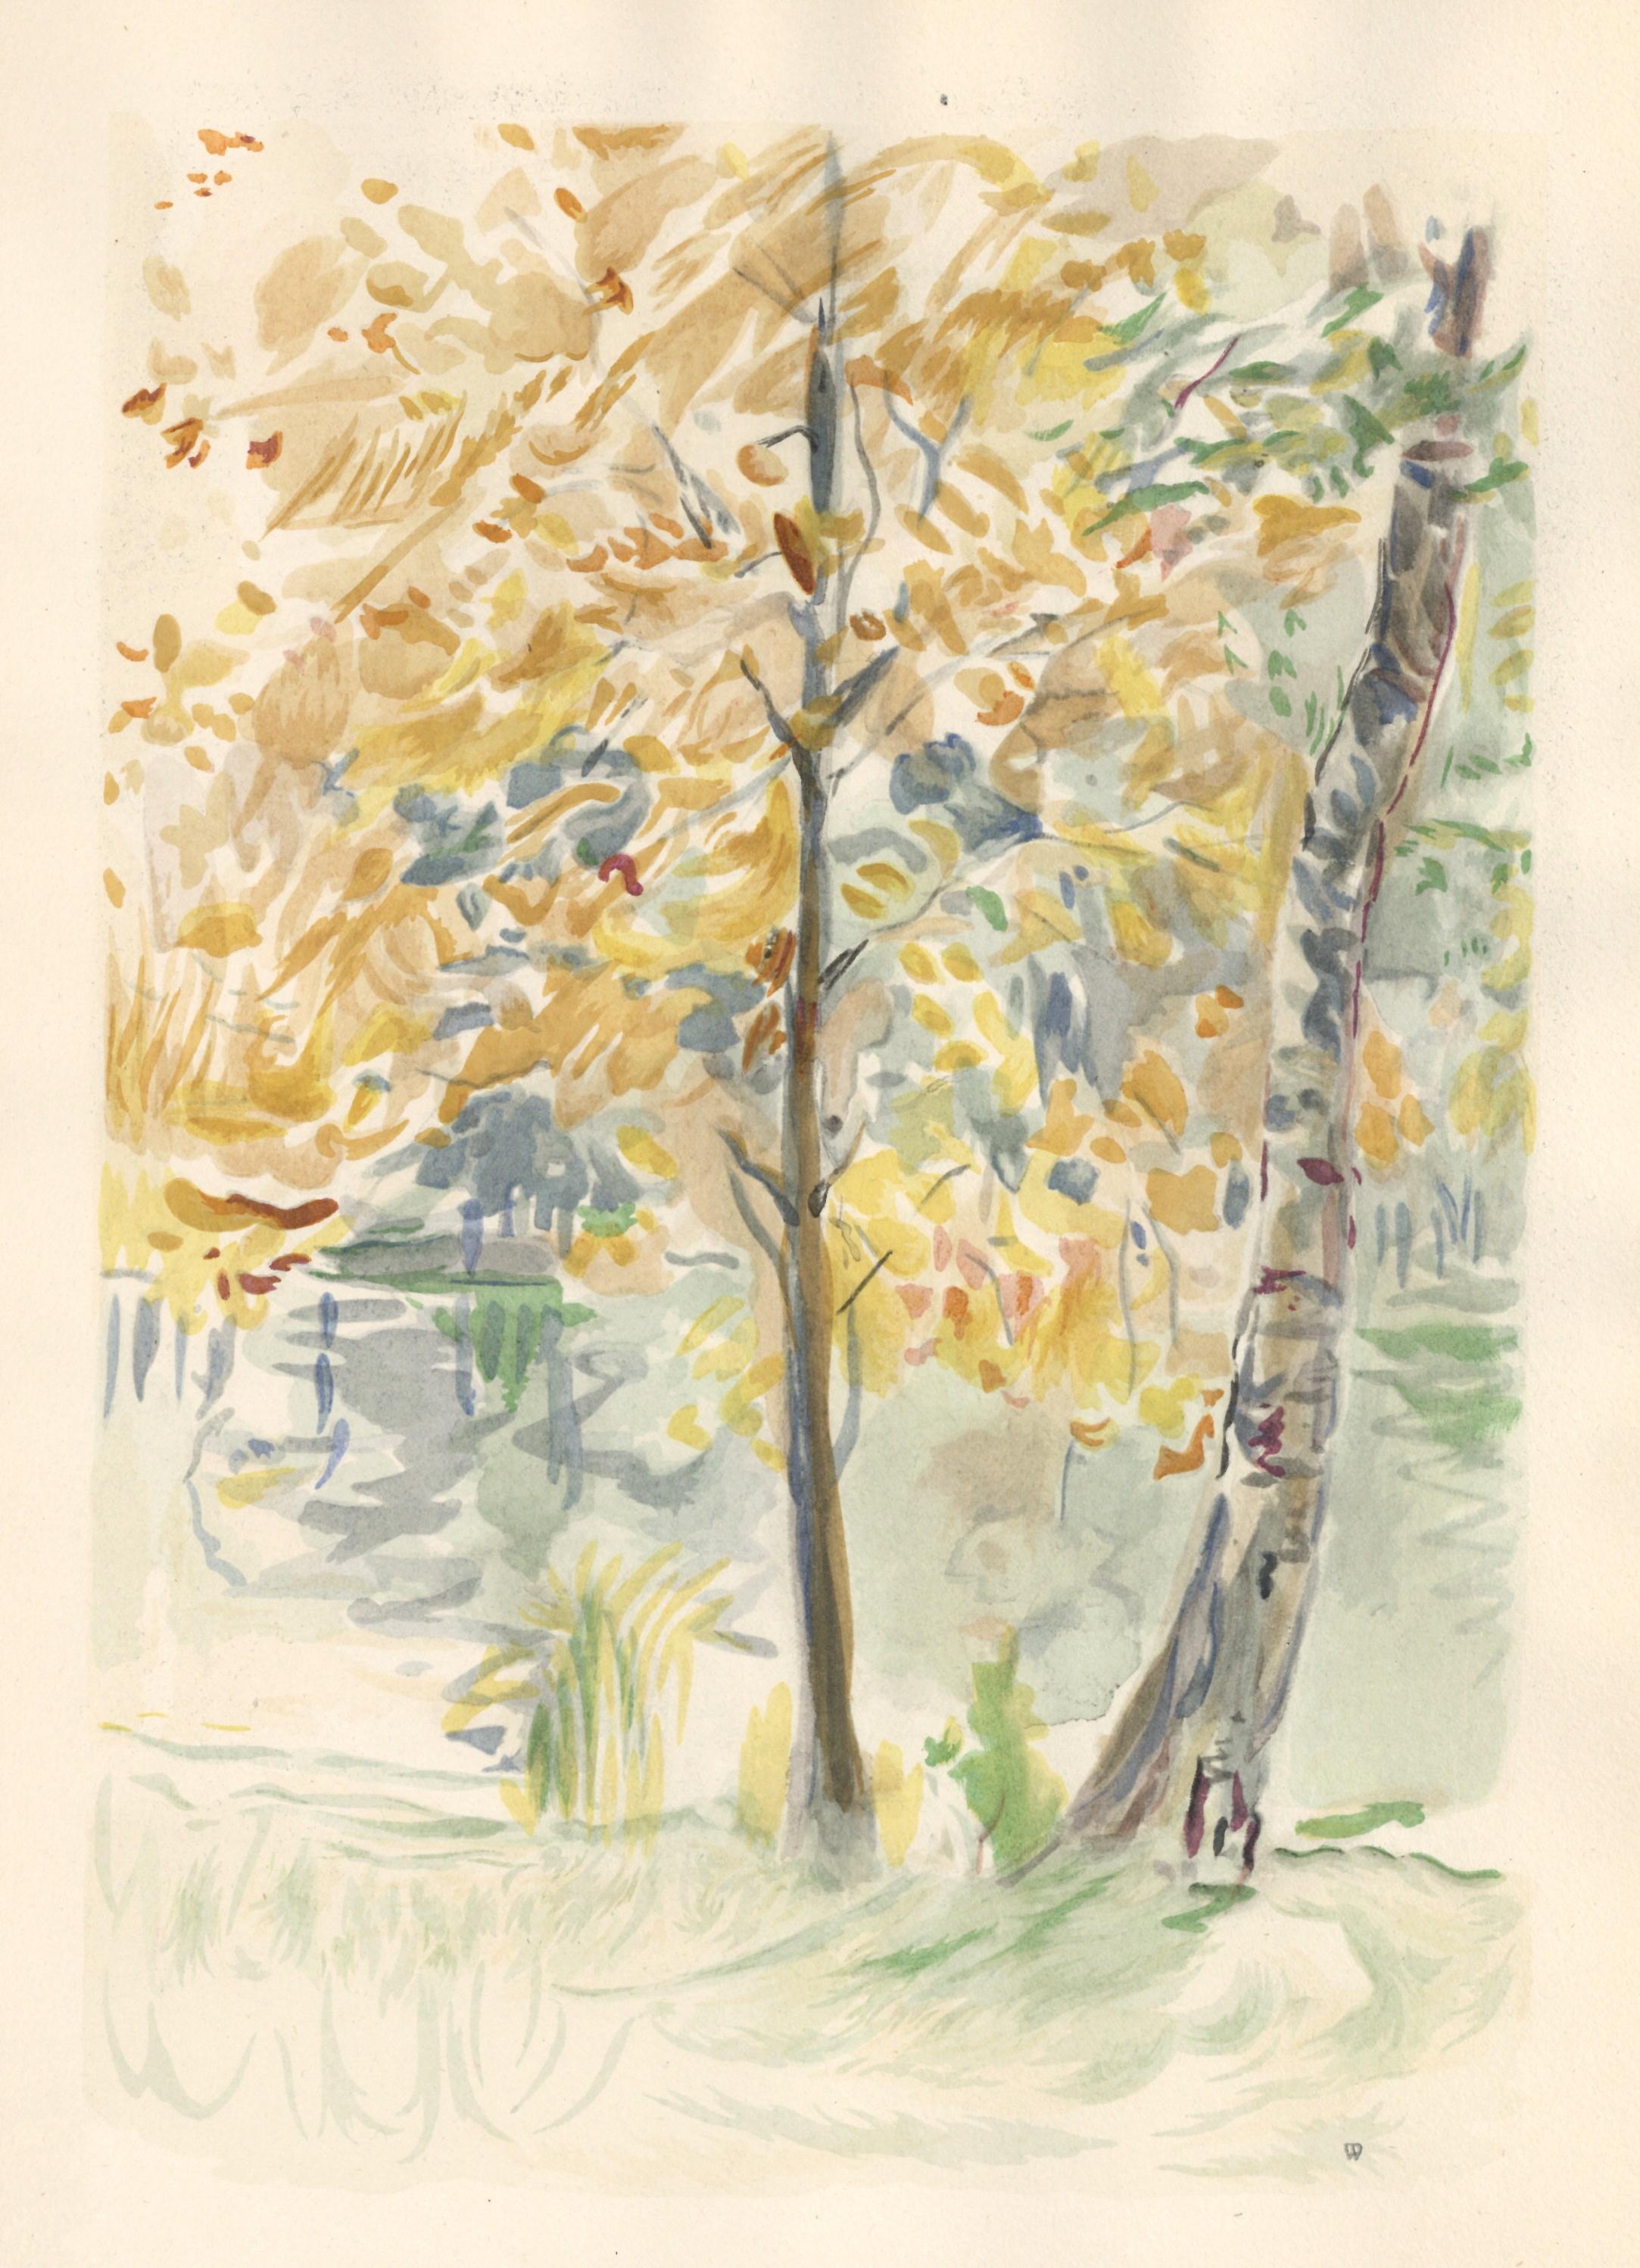 Medium: pochoir (after the 1888 watercolor). Printed 1946 in a limited edition of 300 for the rare "Berthe Morisot Seize Aquarelles" portfolio, published in Paris by Quatre Chemins. The image measures 11 1/2 x 7 3/4 inches (290 x 200 mm). The total